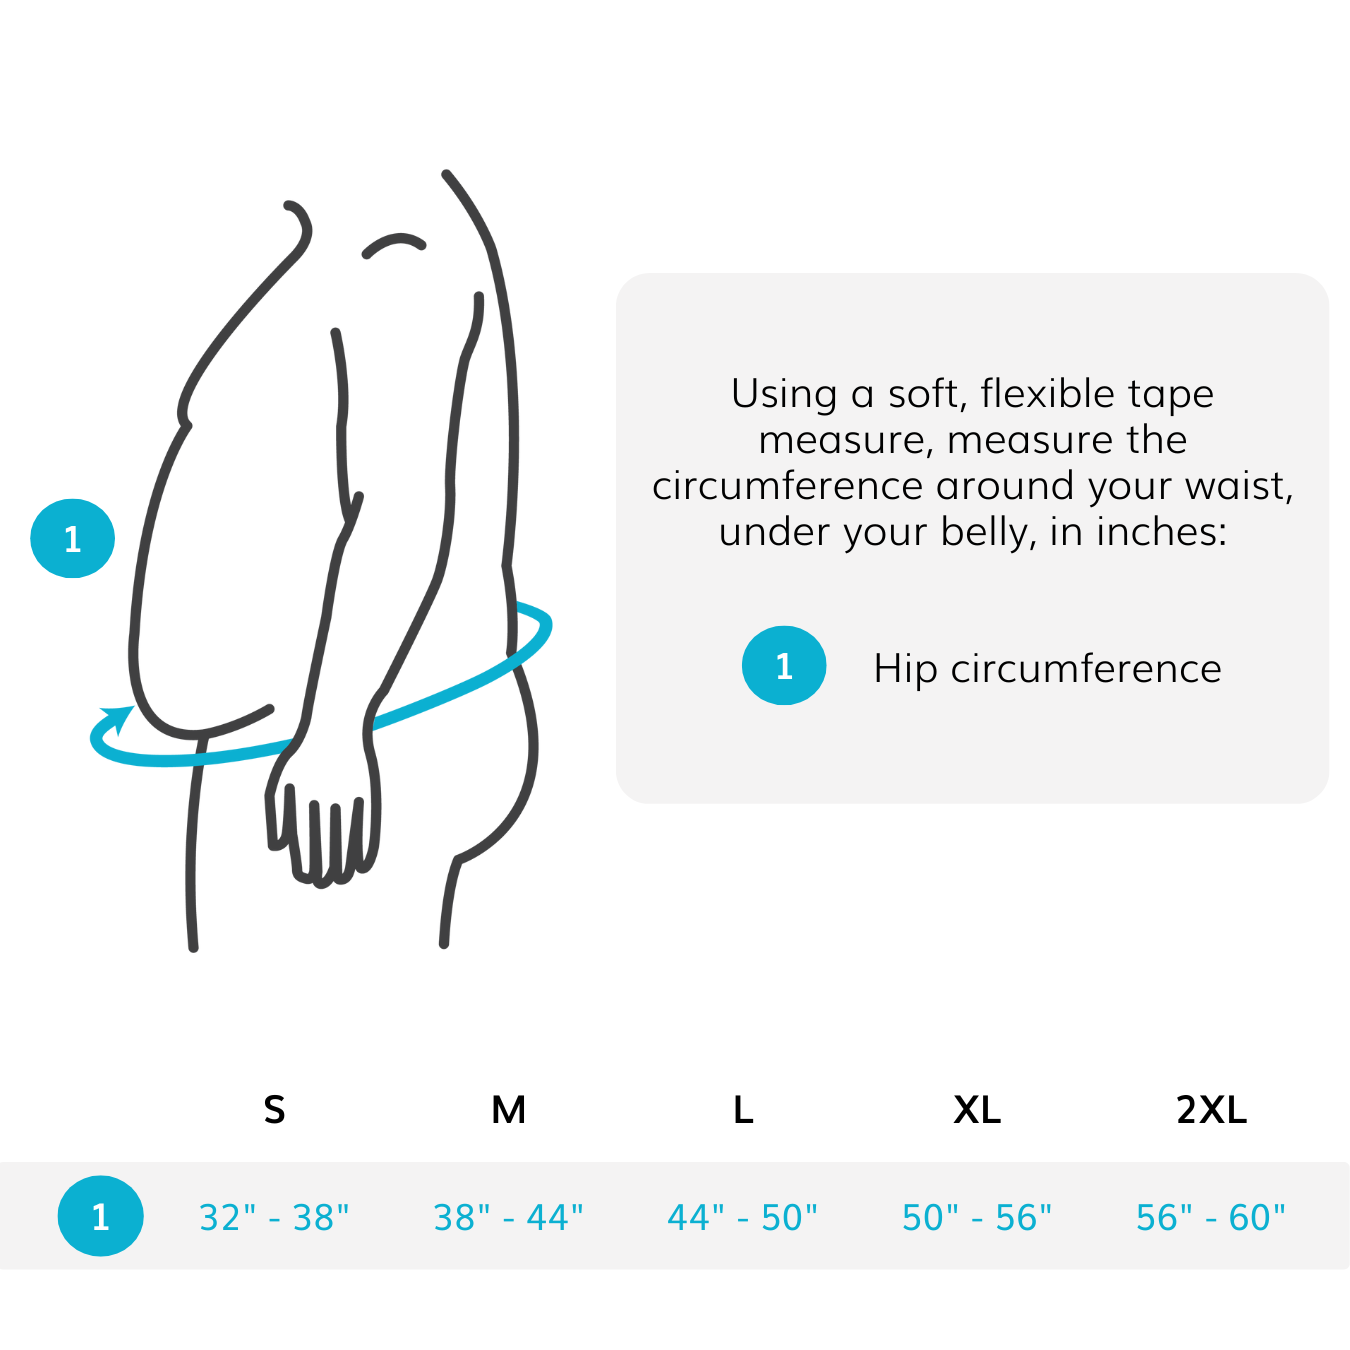 Sizing chart for obesity support belt - measure around your hips. Sizes from small through two extra large